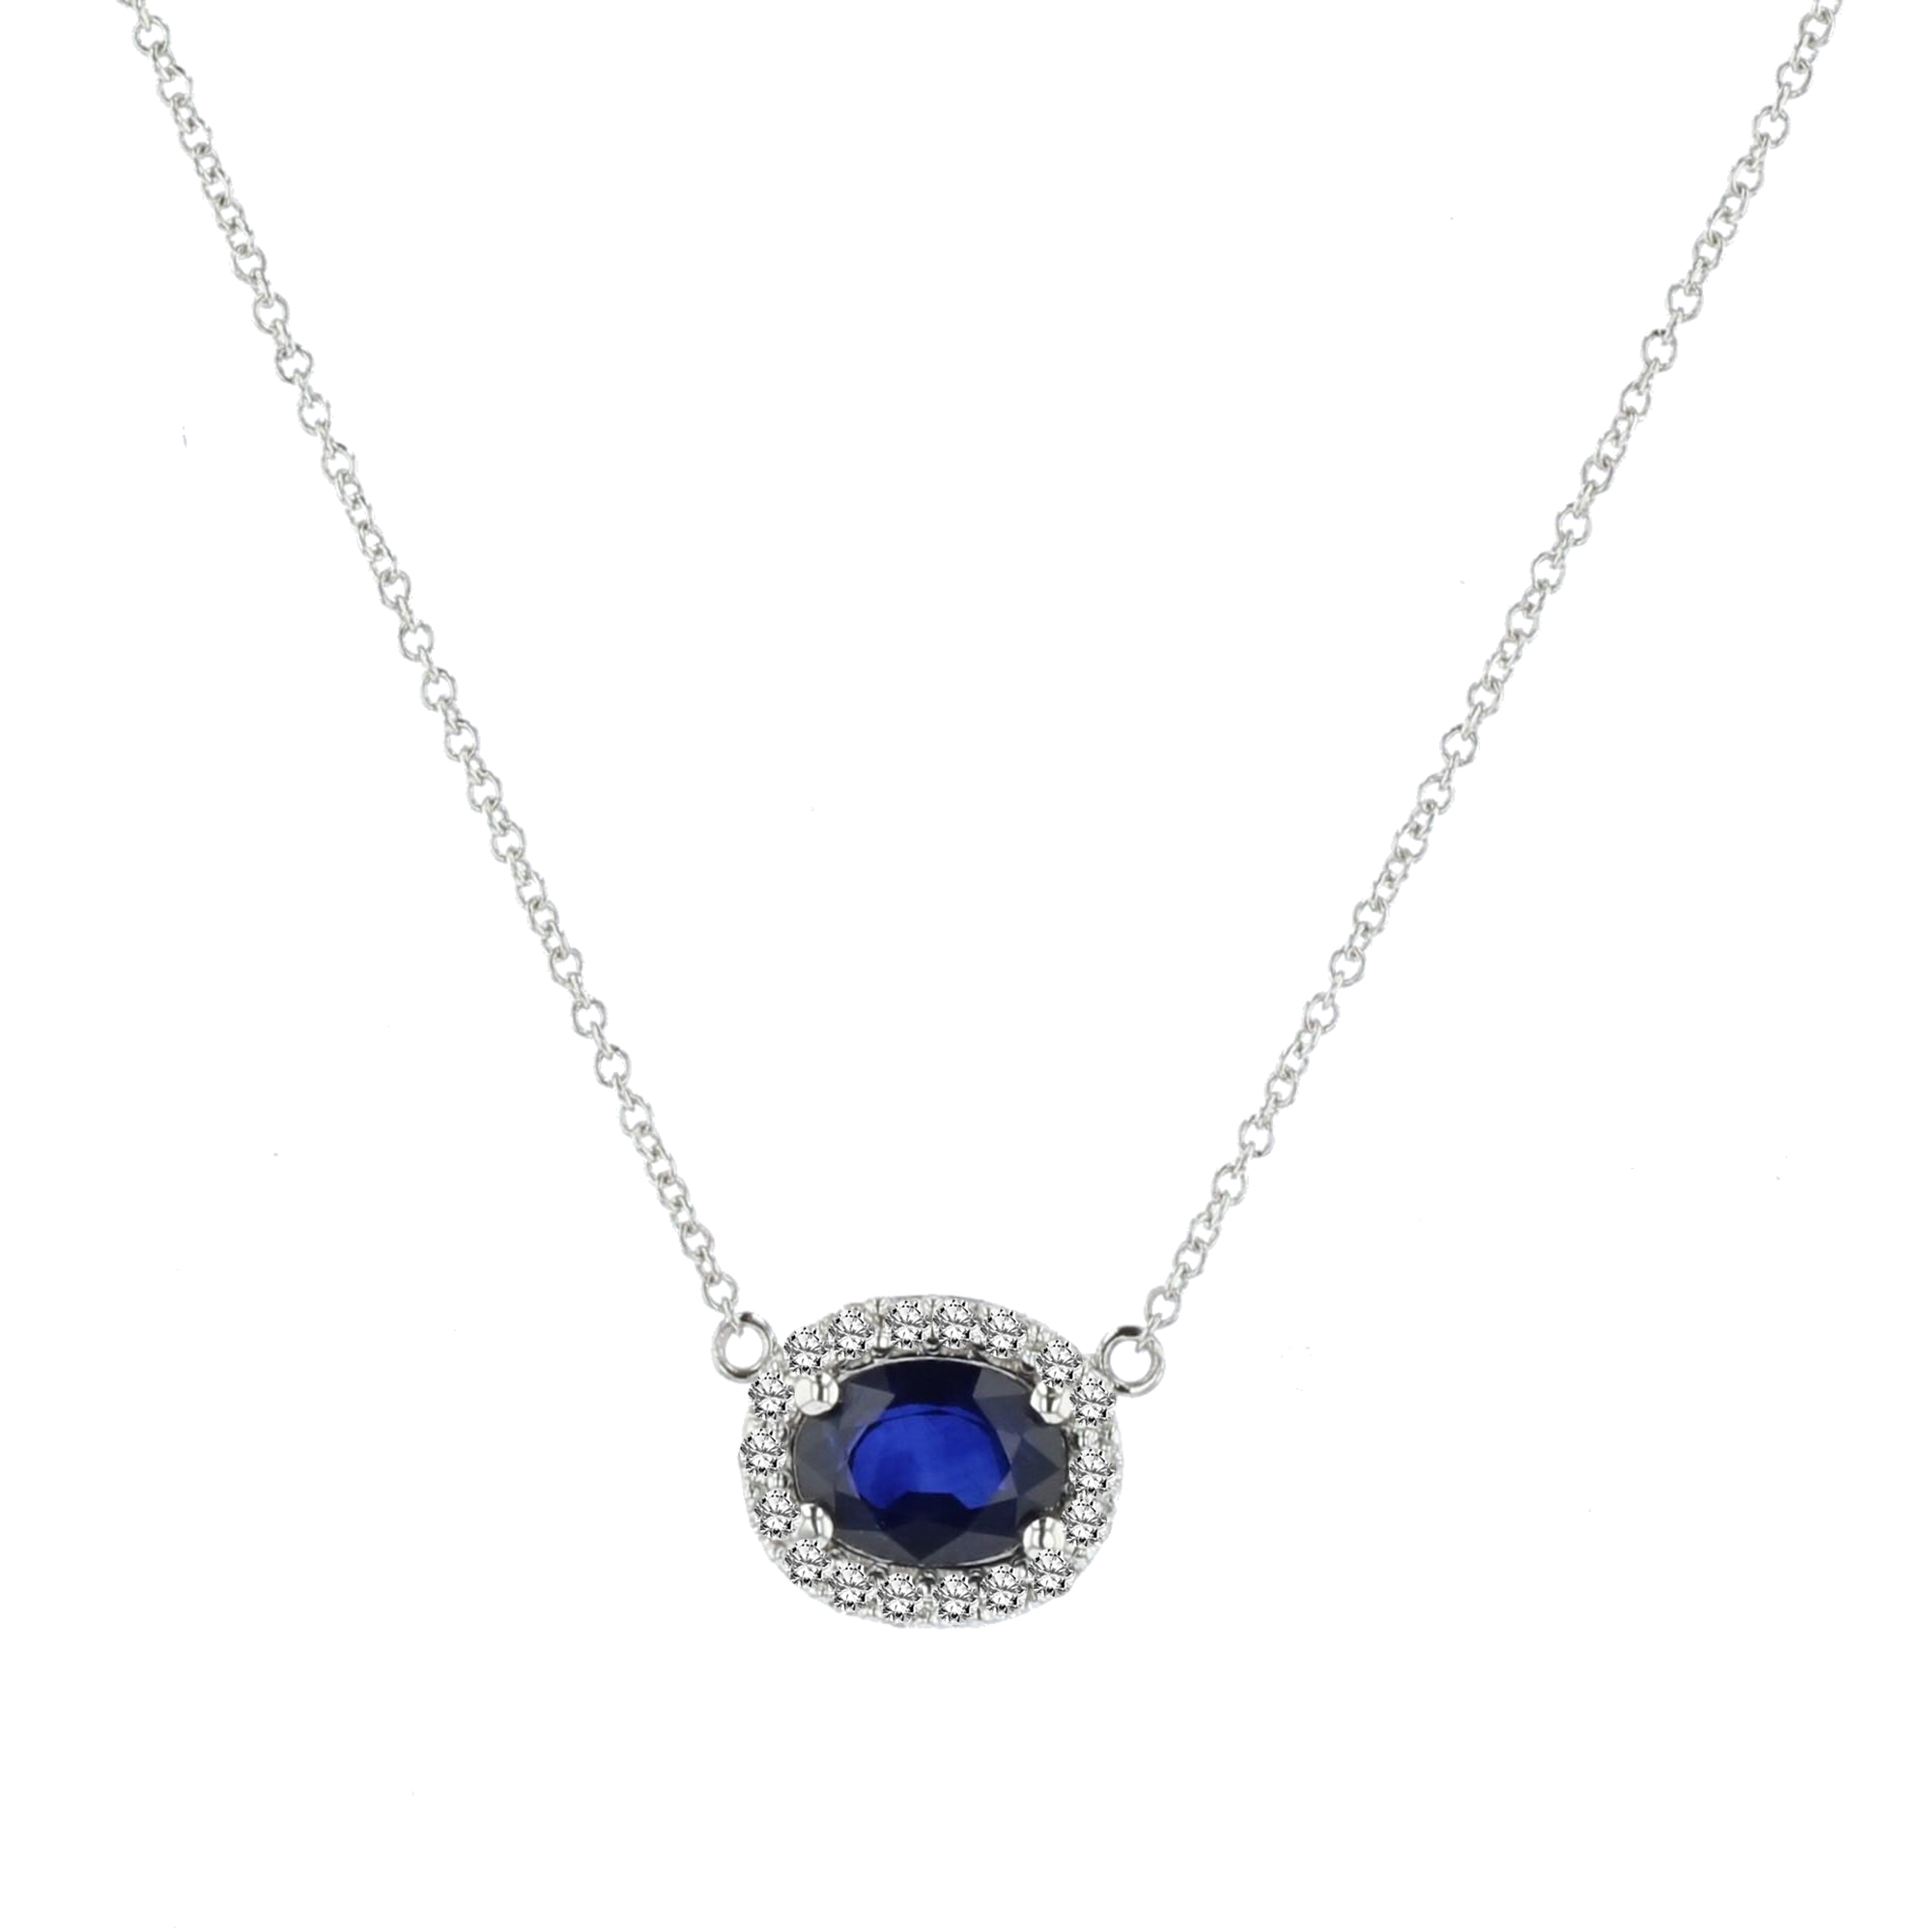 View 0.15ctw Diamond and Sapphire Pendant on 14k White Gold